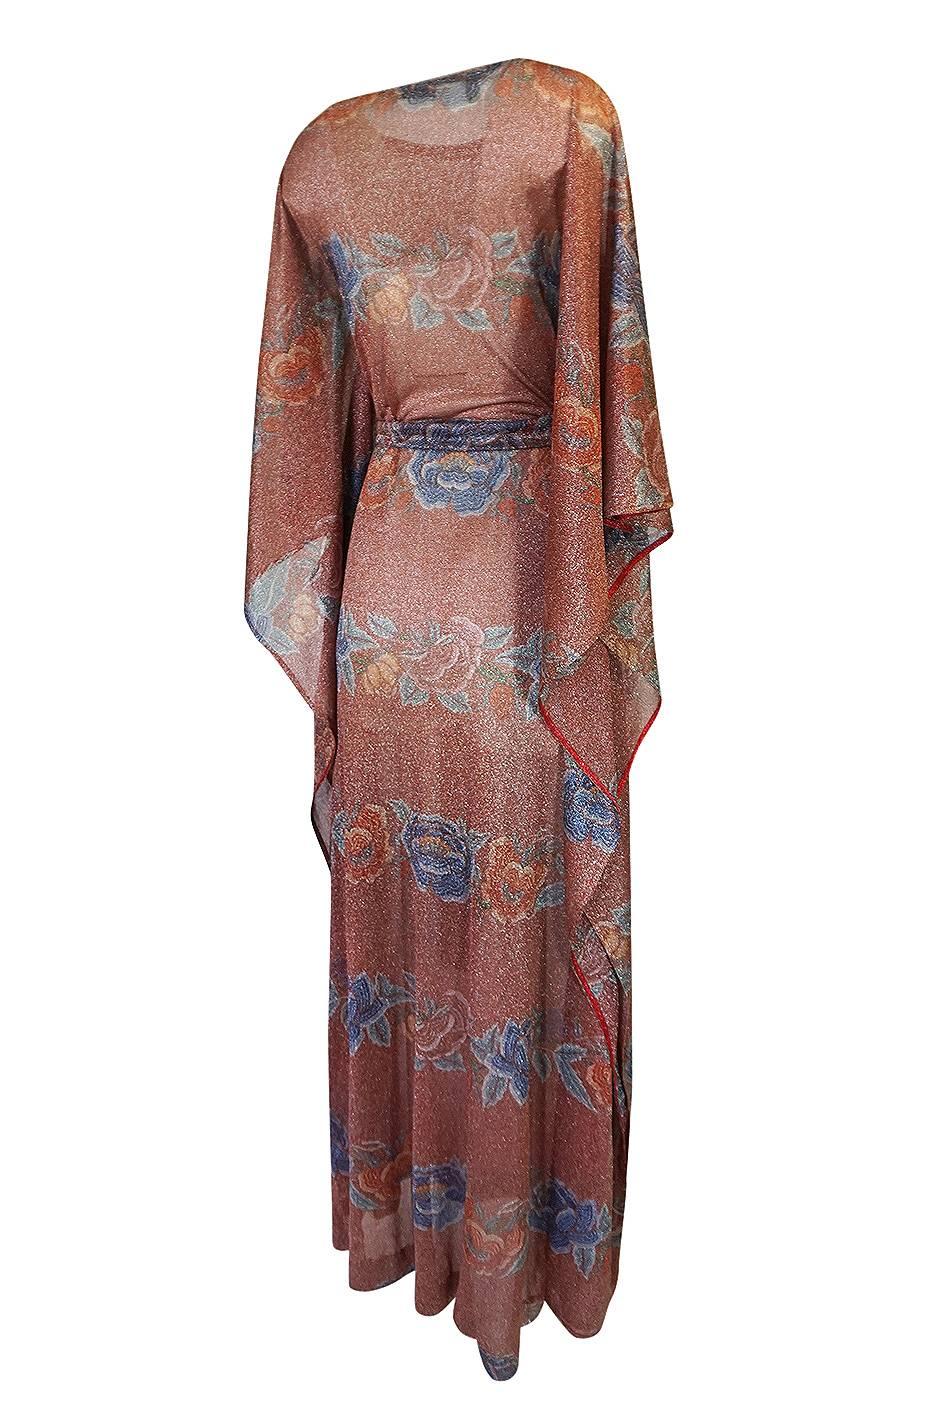 This is one of the holy grails when looking for and finding vintage Missoni. It is a metallic lurex floral caftan dress. Similar, but less dramatic pieces with this floral print appeared in the 1972-73 season in Vogue and telegraph magazine and I